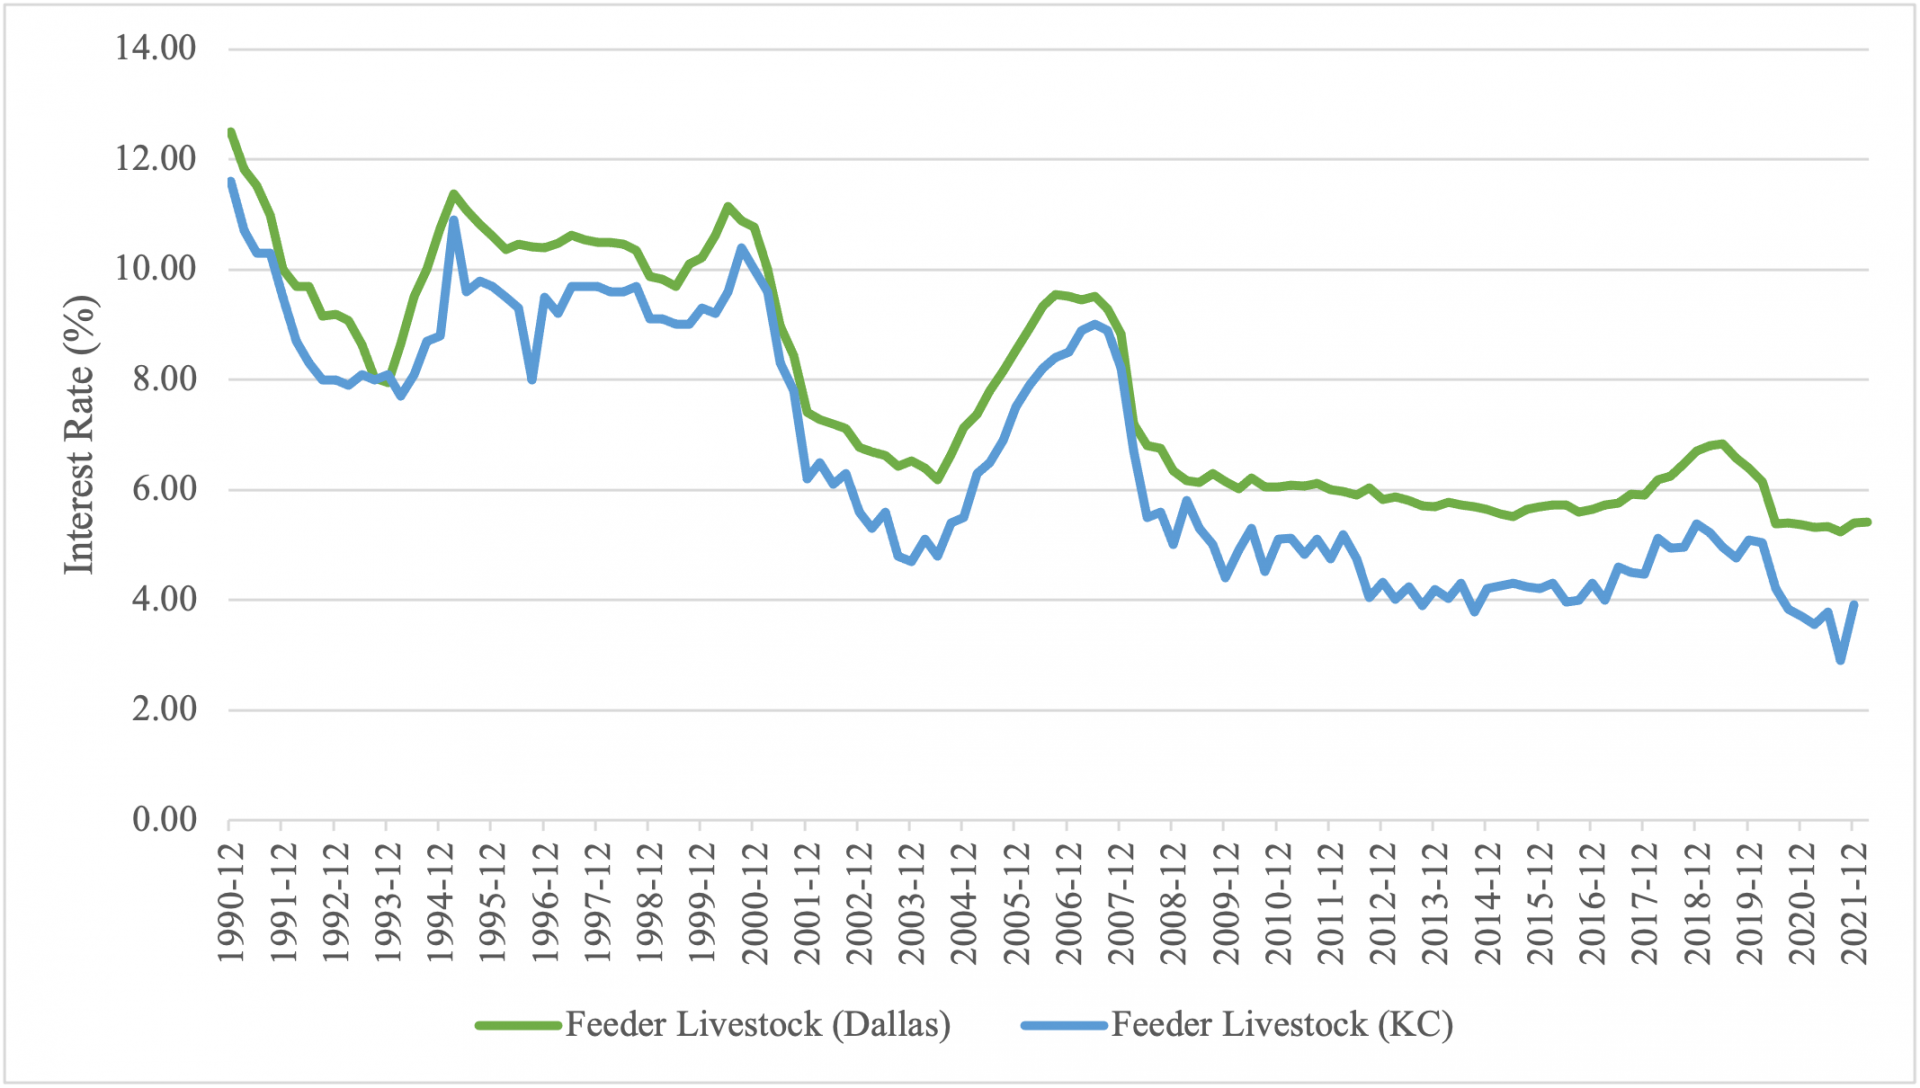 Quarterly Feeder Cattle Variable Interest Rates by Region